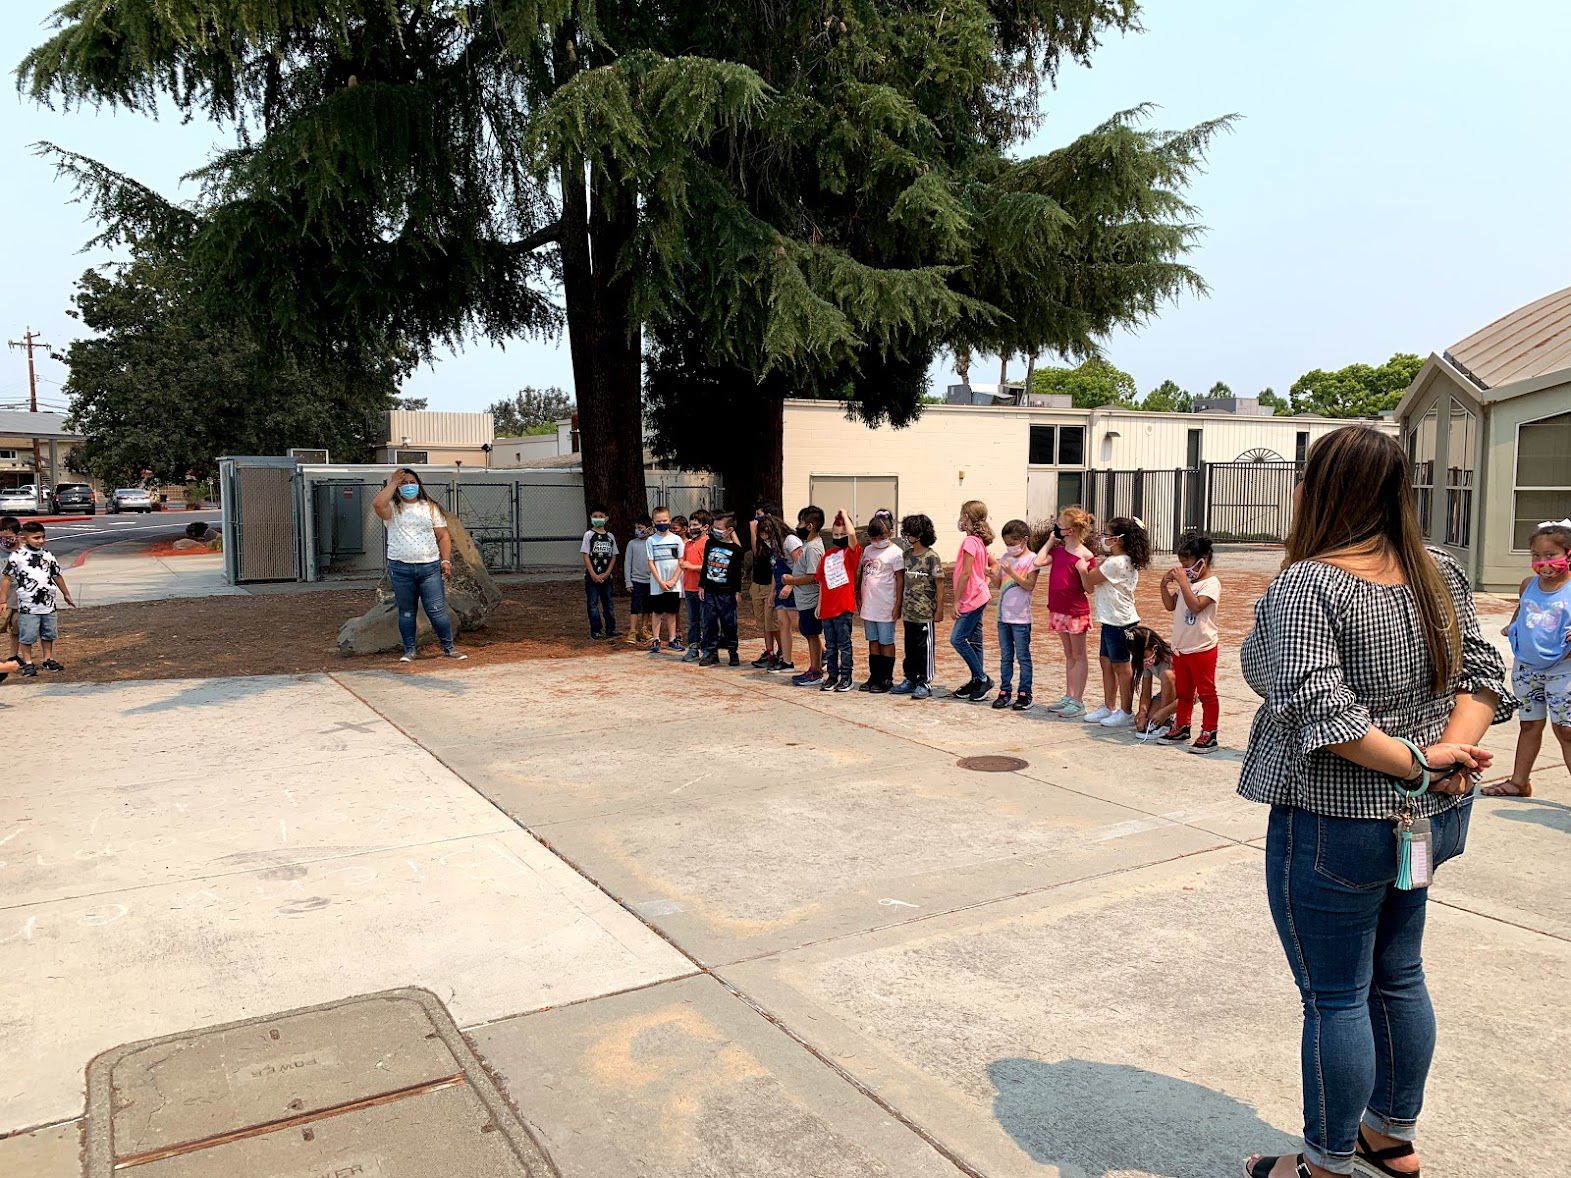 Teachers and students lined up outside of school